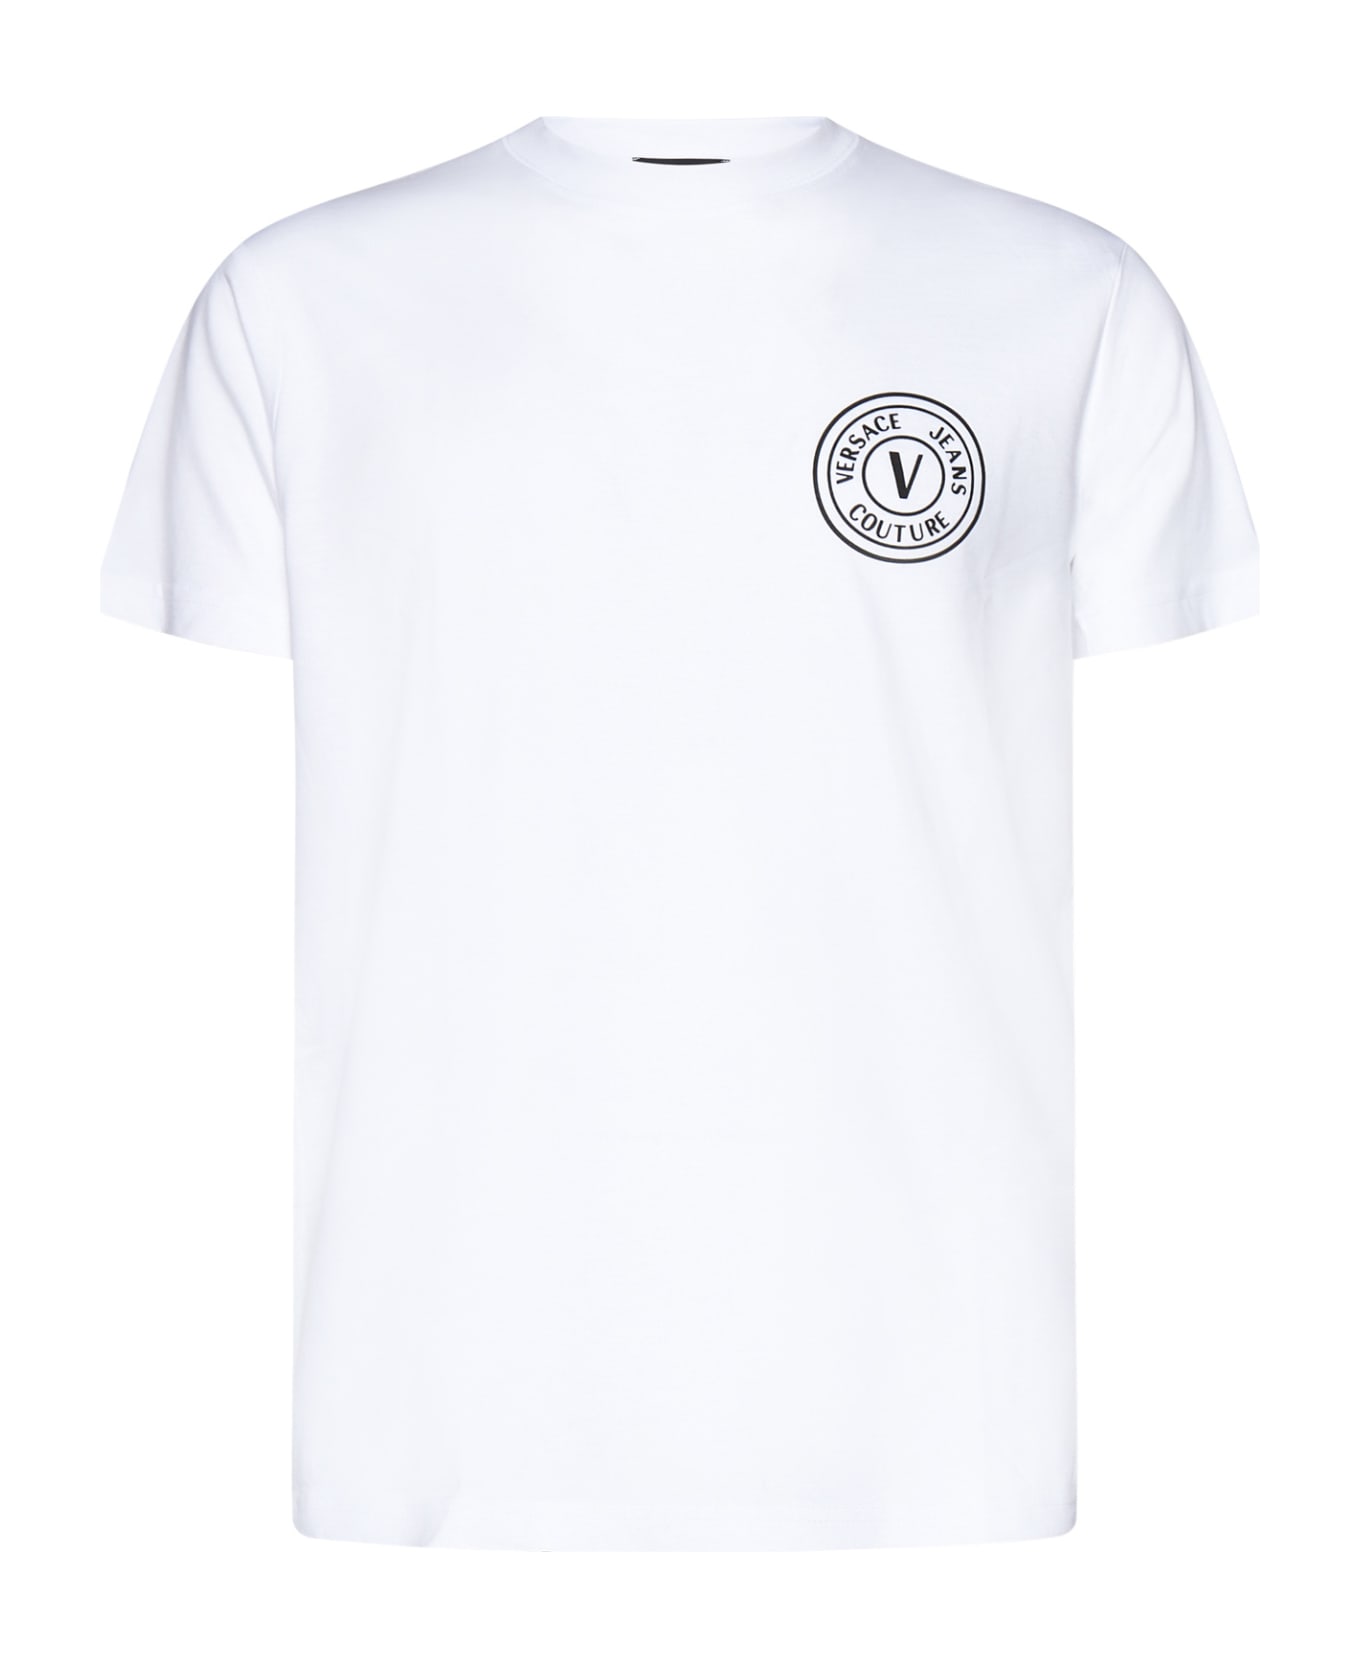 Versace Jeans Couture T-shirt - White